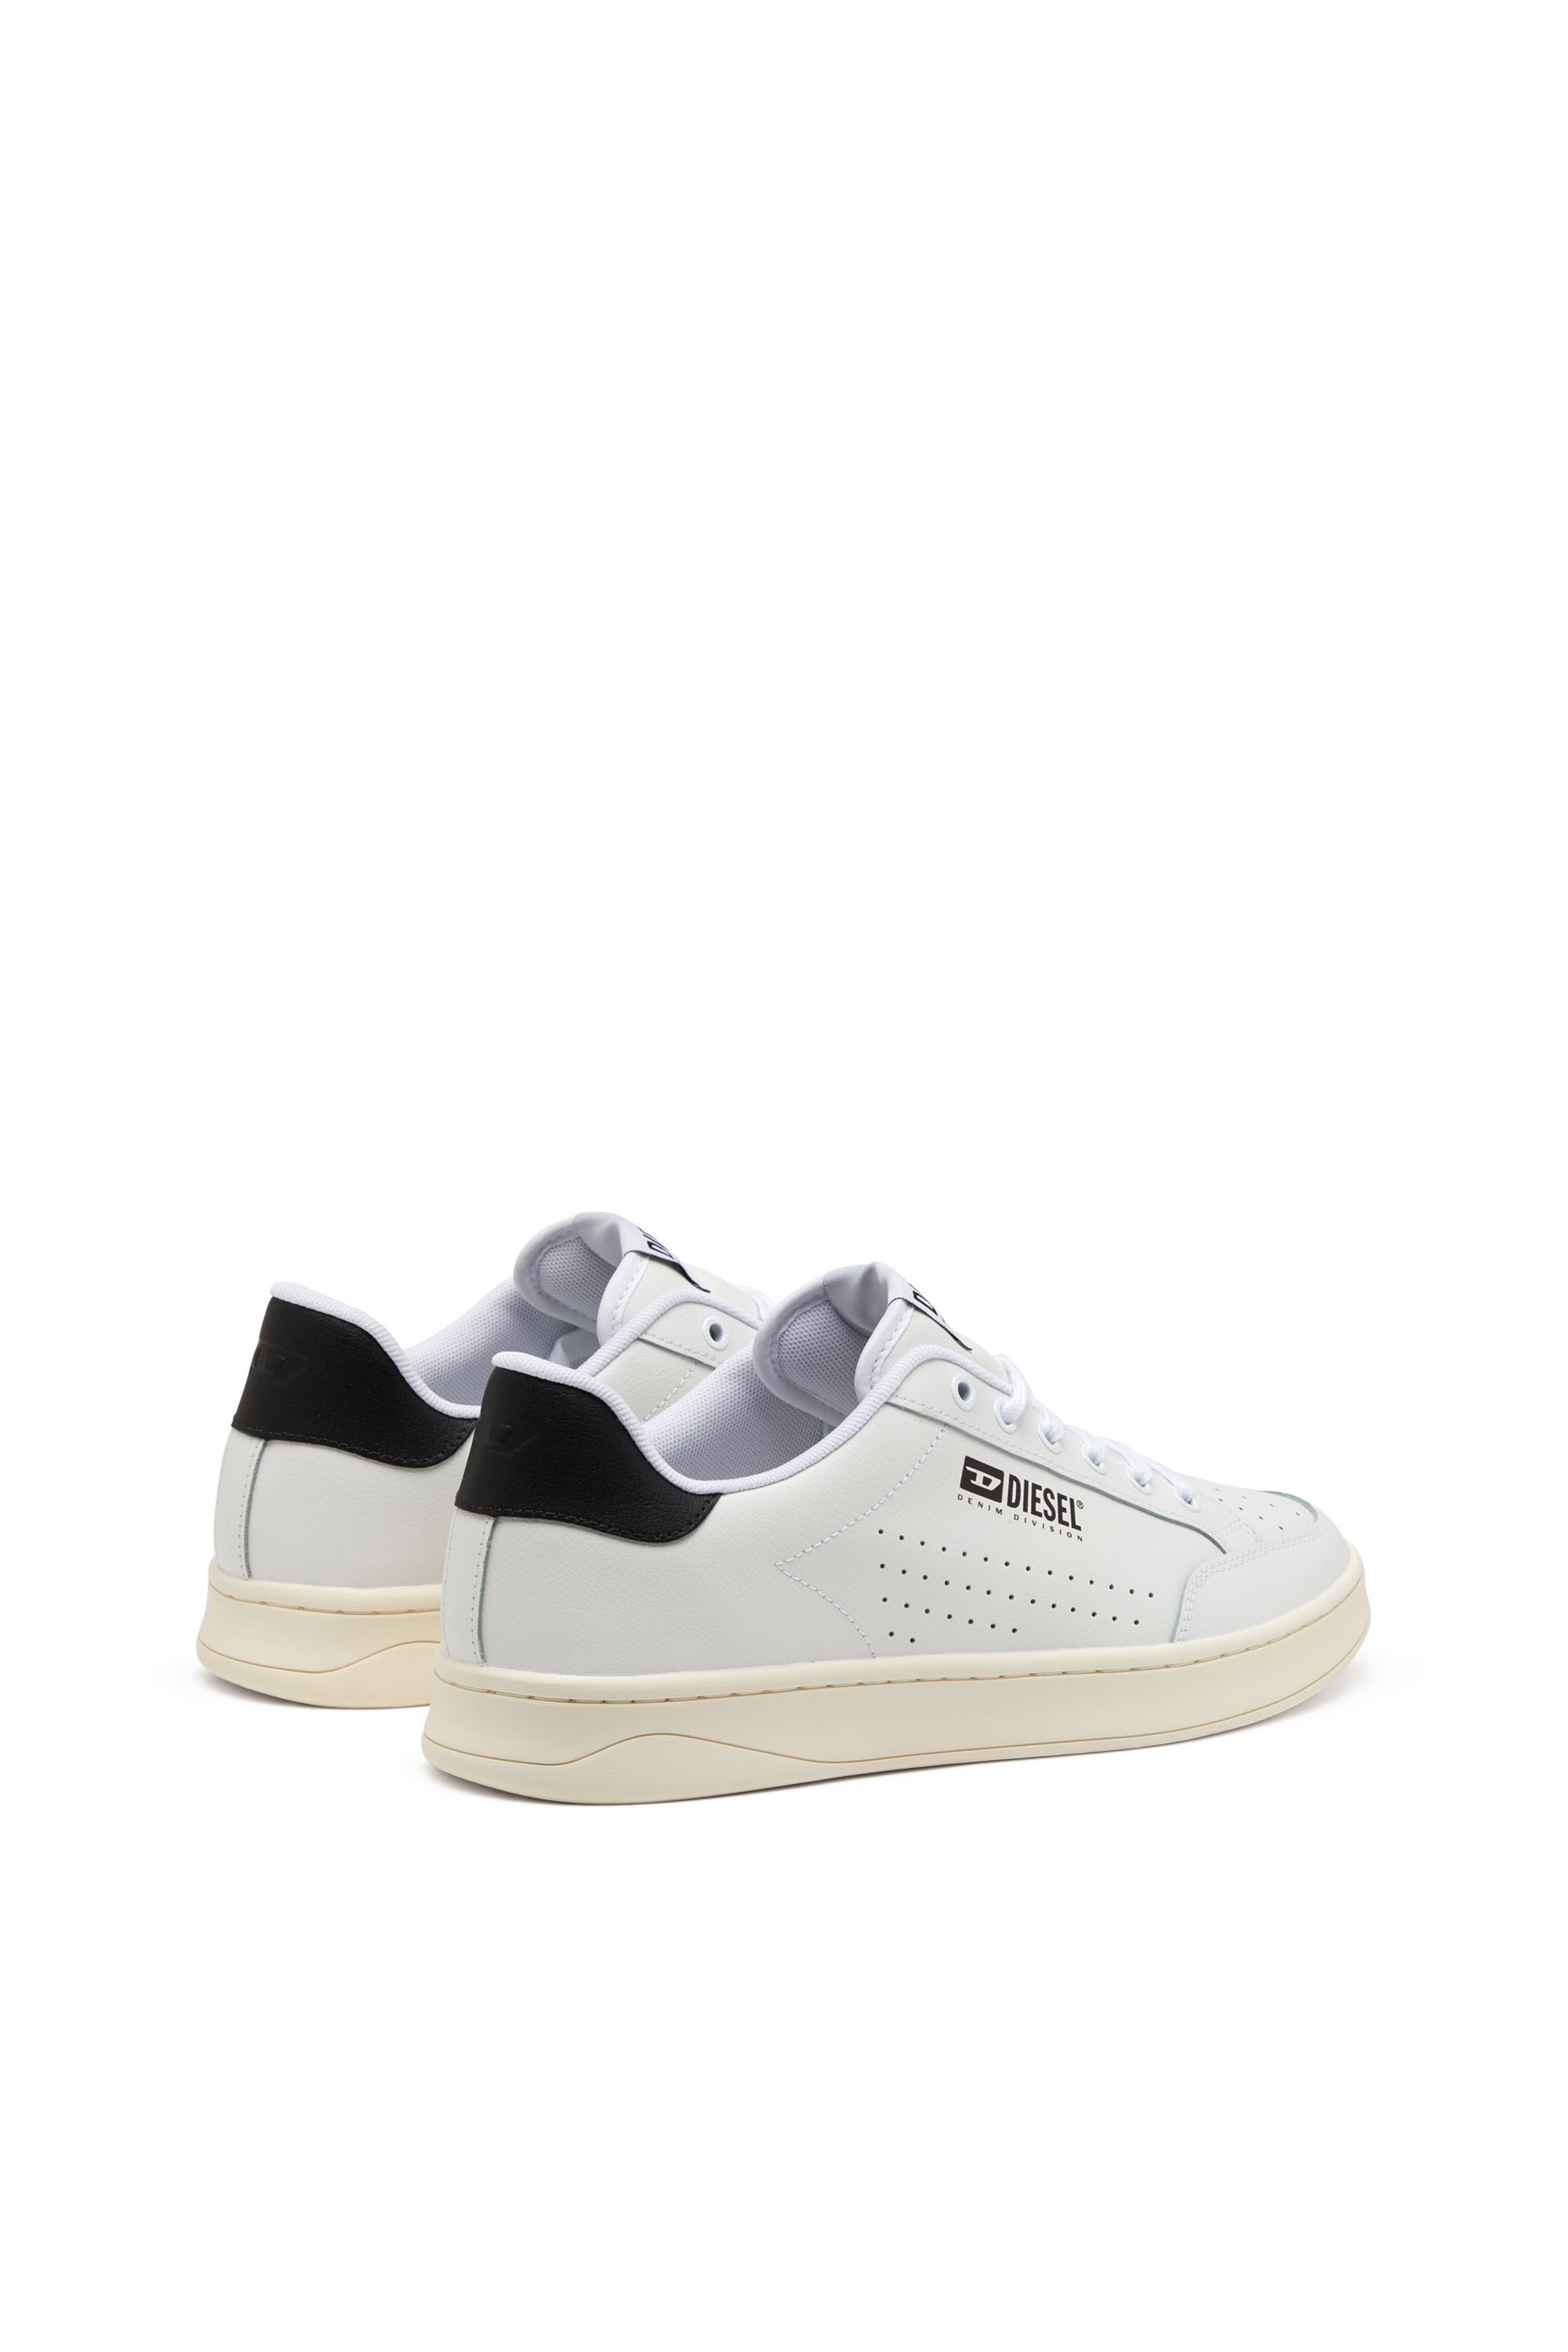 Diesel - S-ATHENE VTG, Man S-Athene-Retro sneakers in perforated leather in Multicolor - Image 3